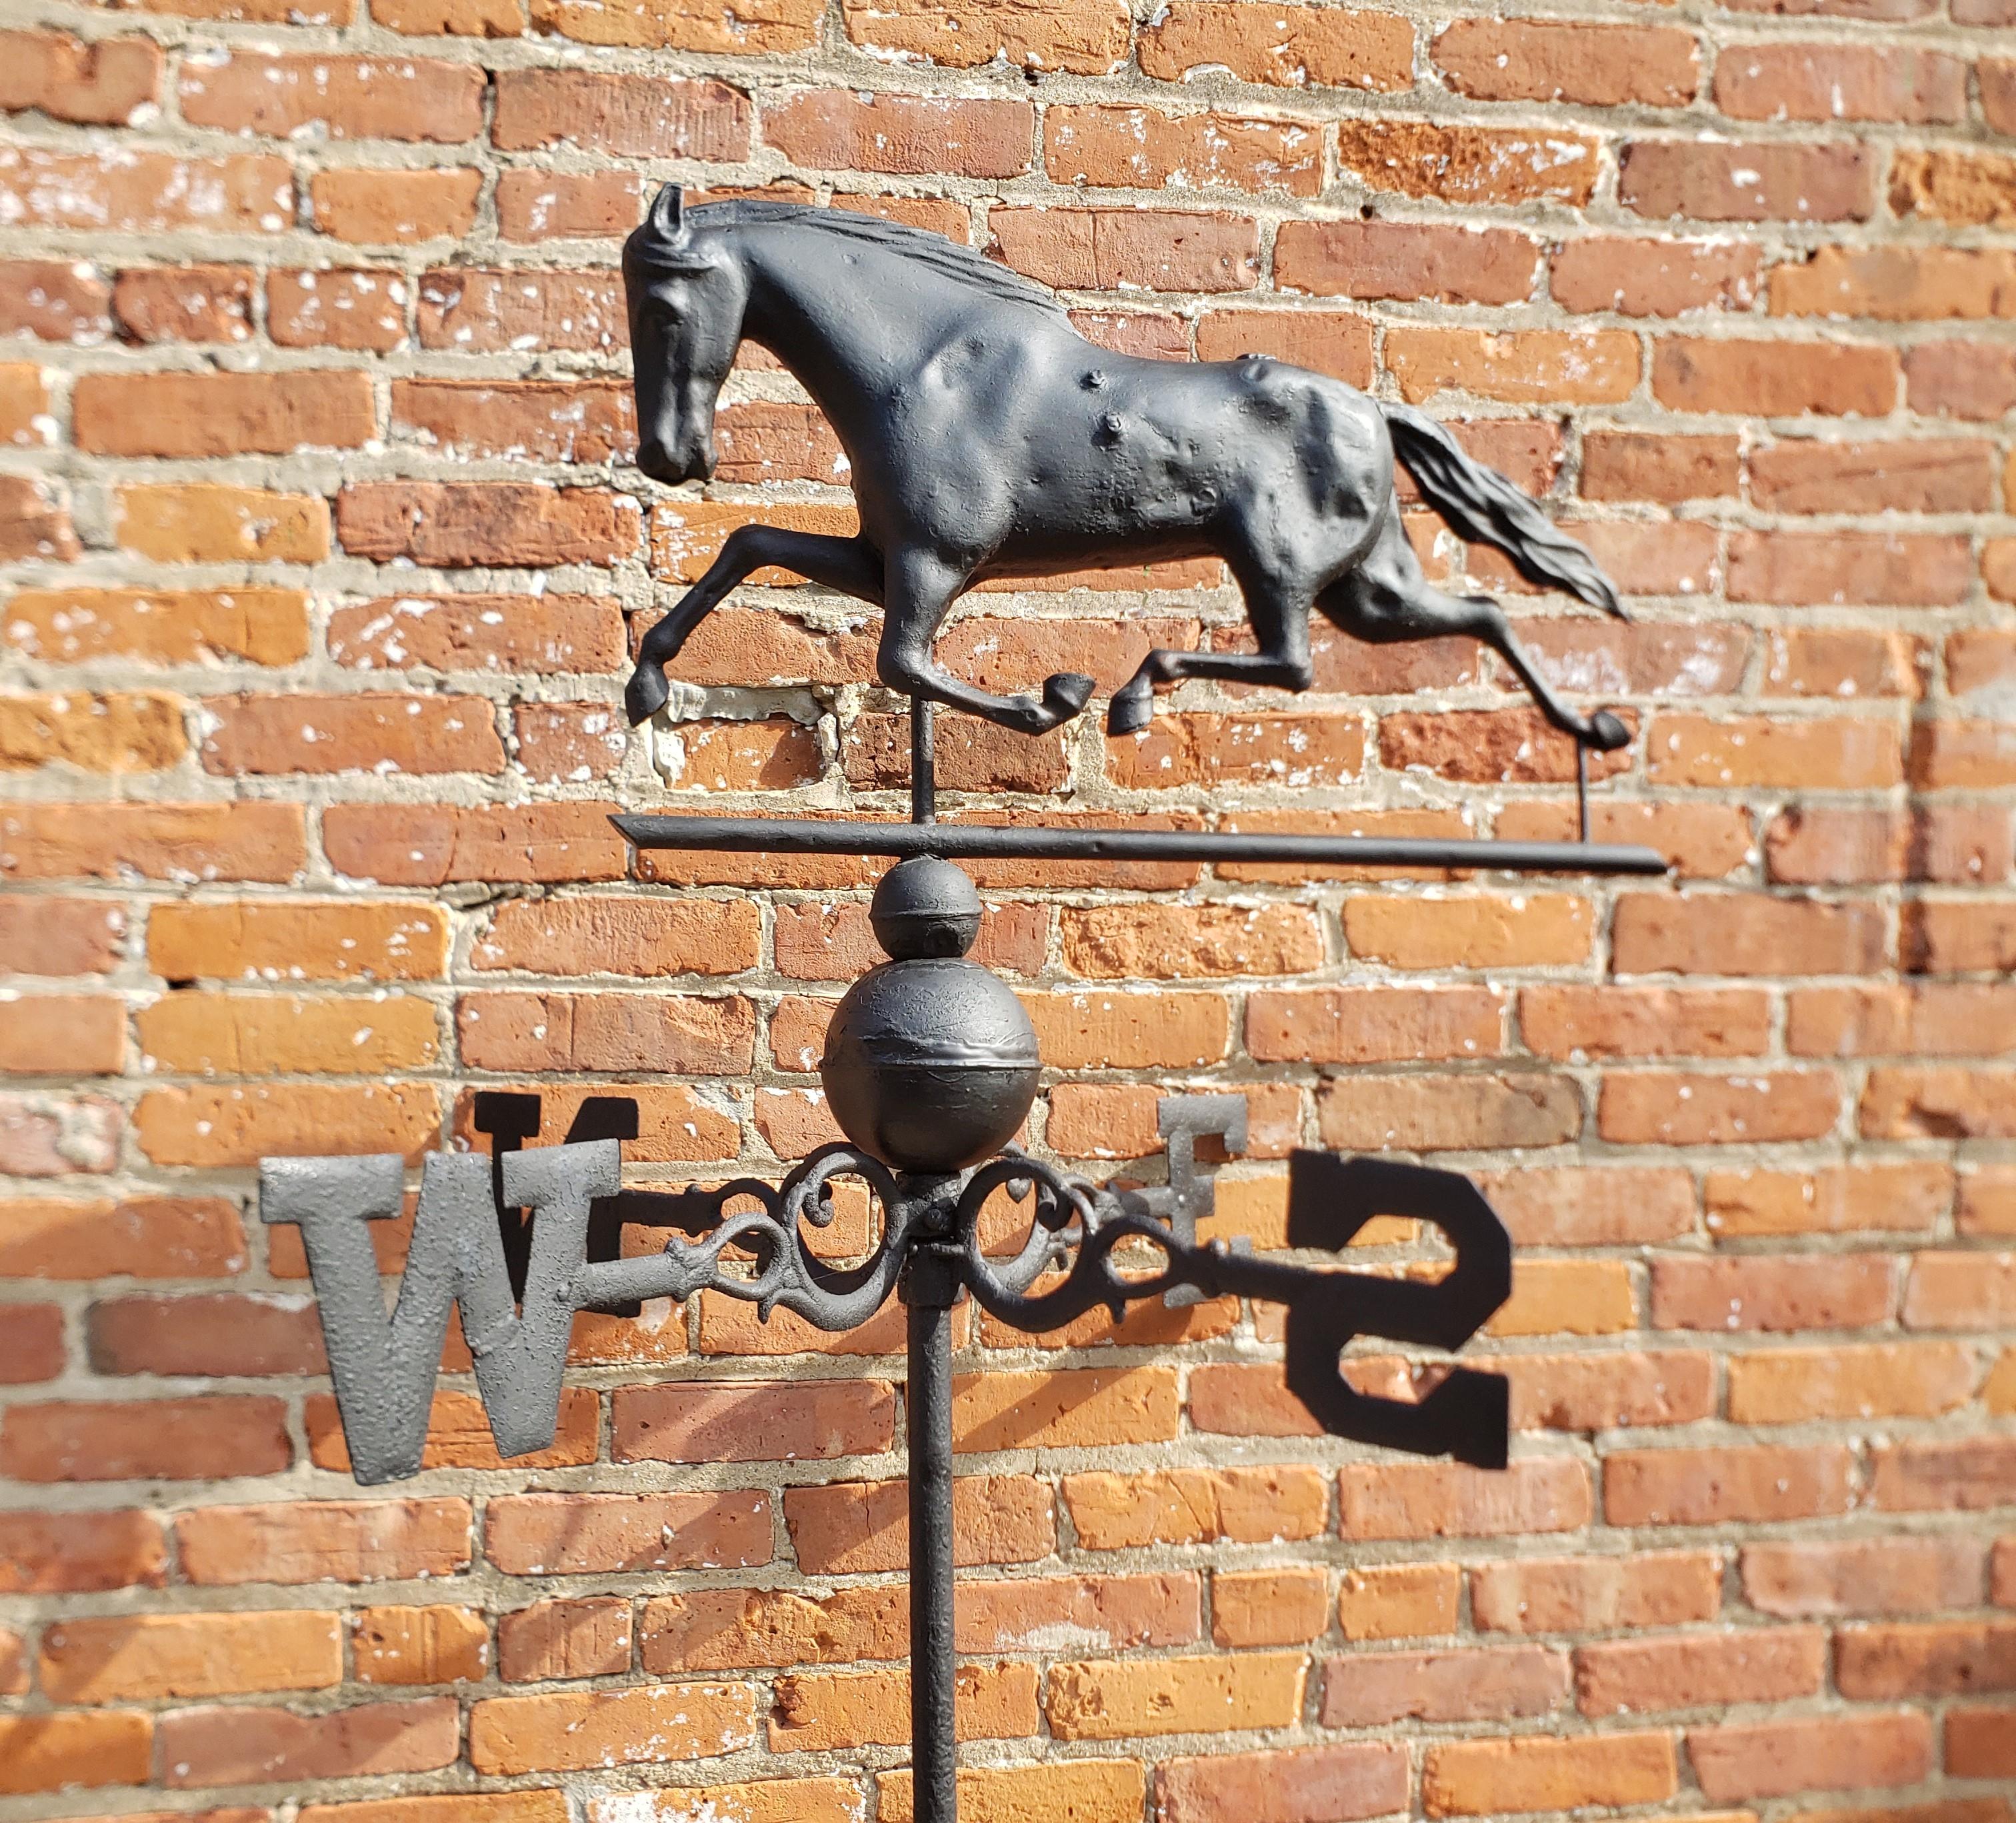 This figural antique weathervane is usigned, but presumed to have originated from the United States and date to approximately 1880 and done in the period Victorian style. The top of the weathervane is done in formed copper to depict a galloping